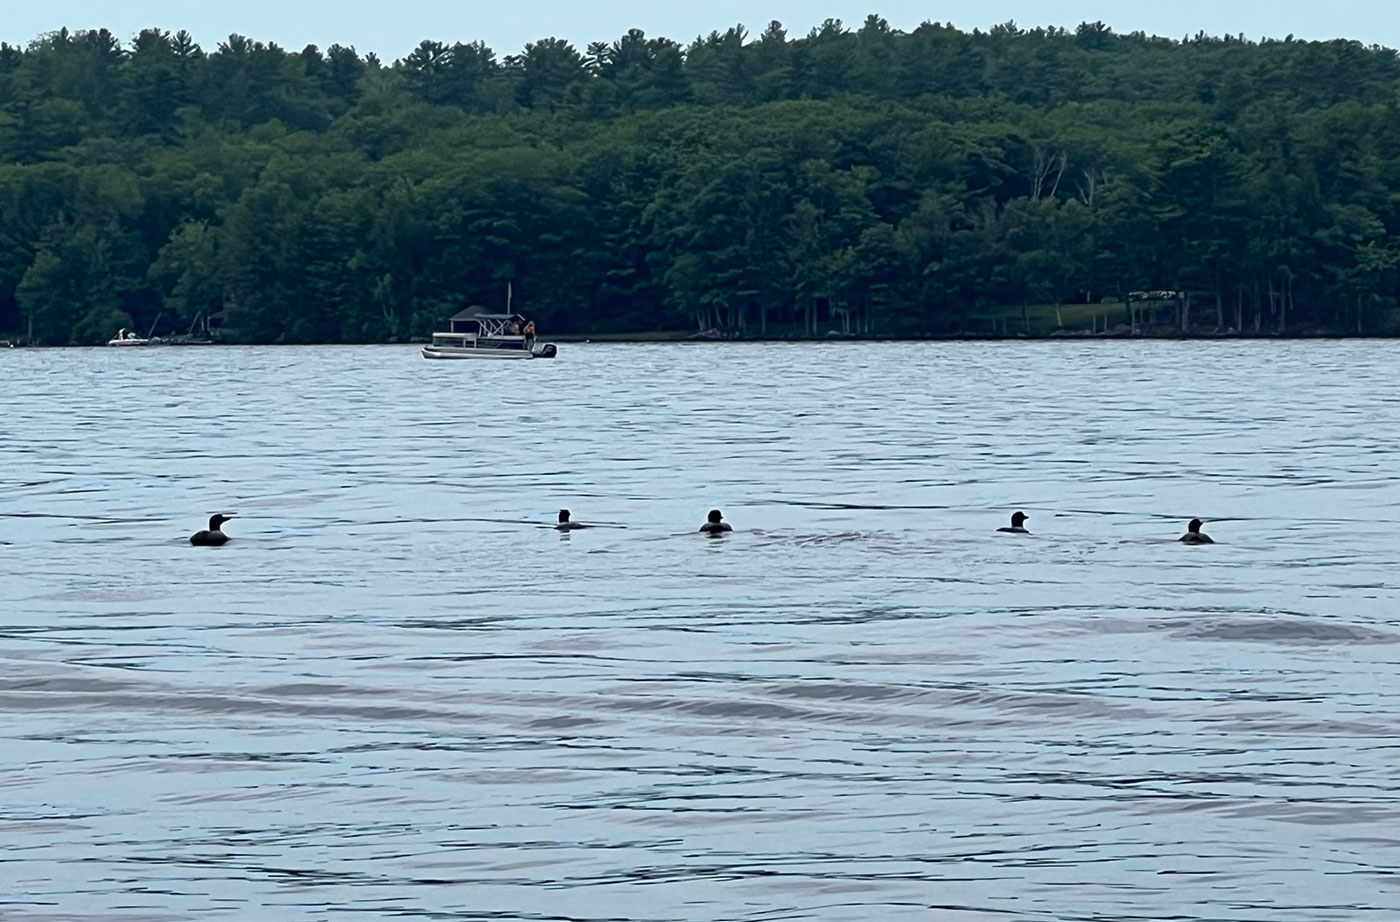 loons on Long Lake near where we scooped up balloons